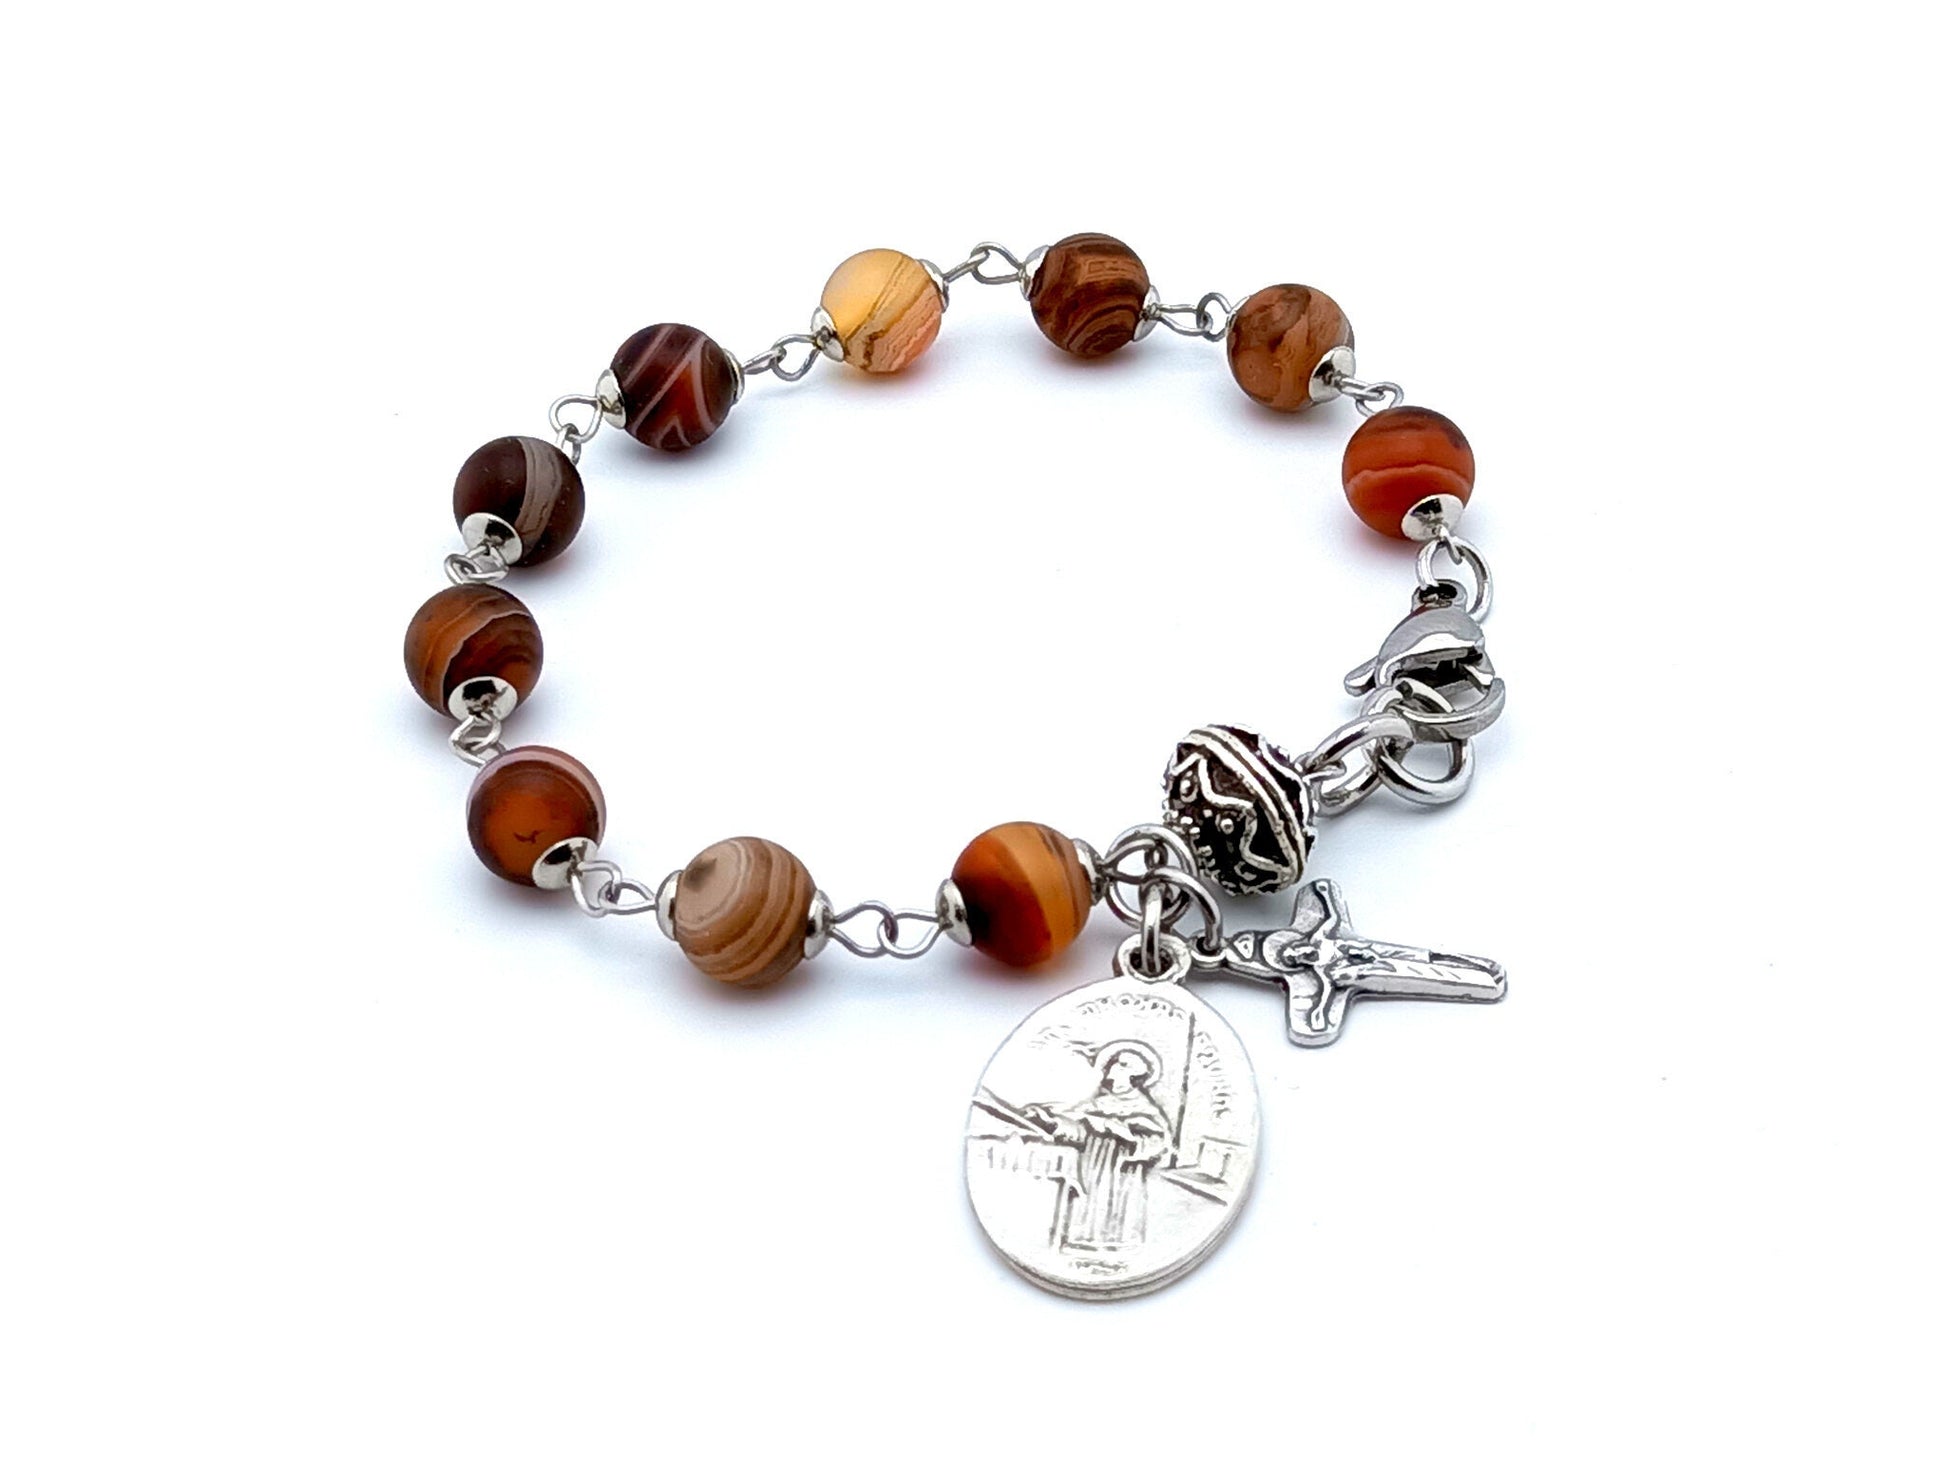 Saint Thomas Aquinas unique rosary beads single decade bracelet with agate gemstone beads, silver crucifix and medal.